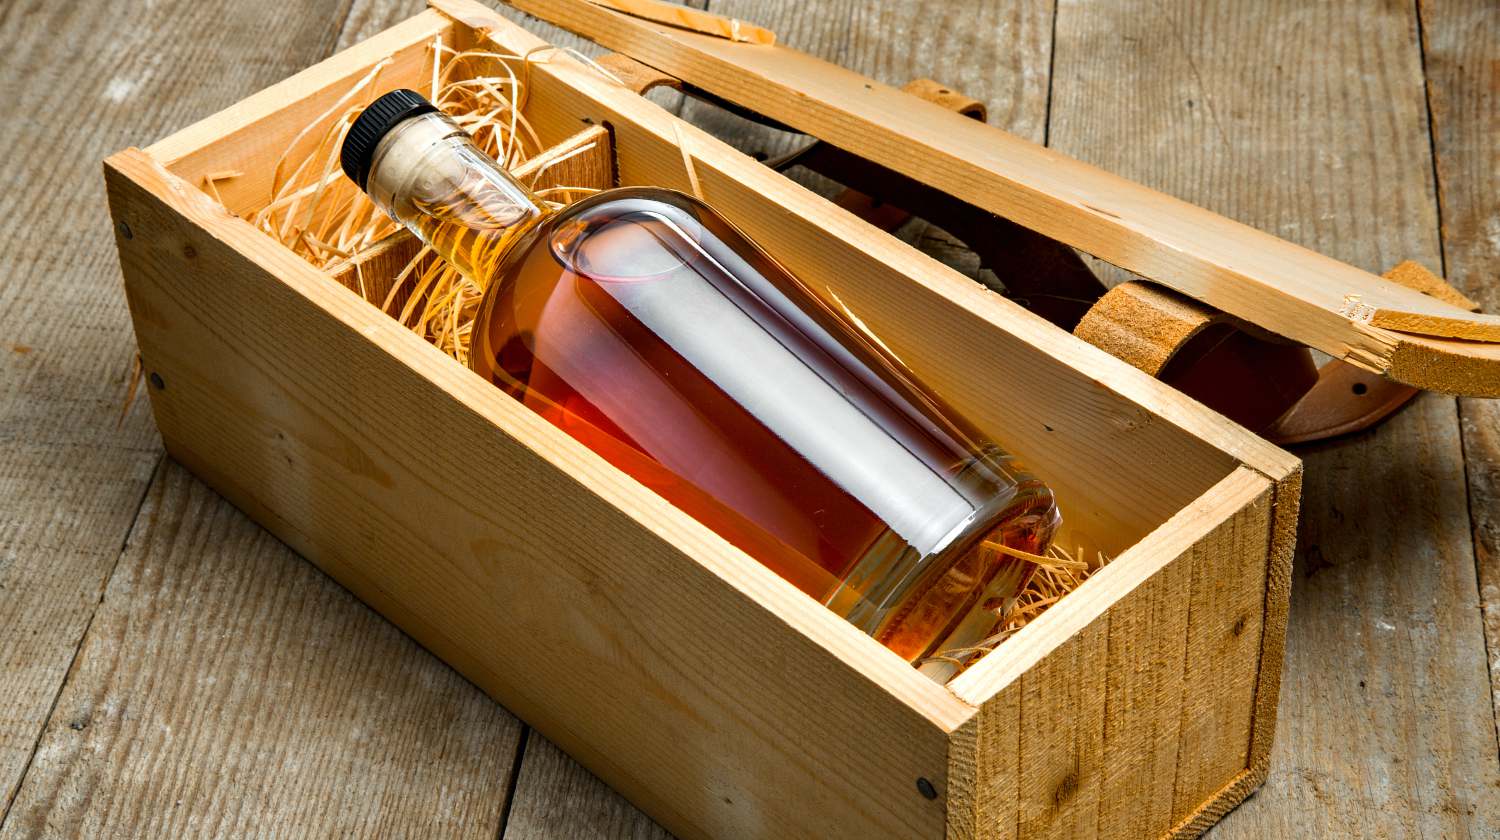 Bottle of liquor aged fine craft whiskey bourbon rum tequila gift package shipping | Super Cool Reclaimed Wood Craft Ideas And DIY Projects | Featured